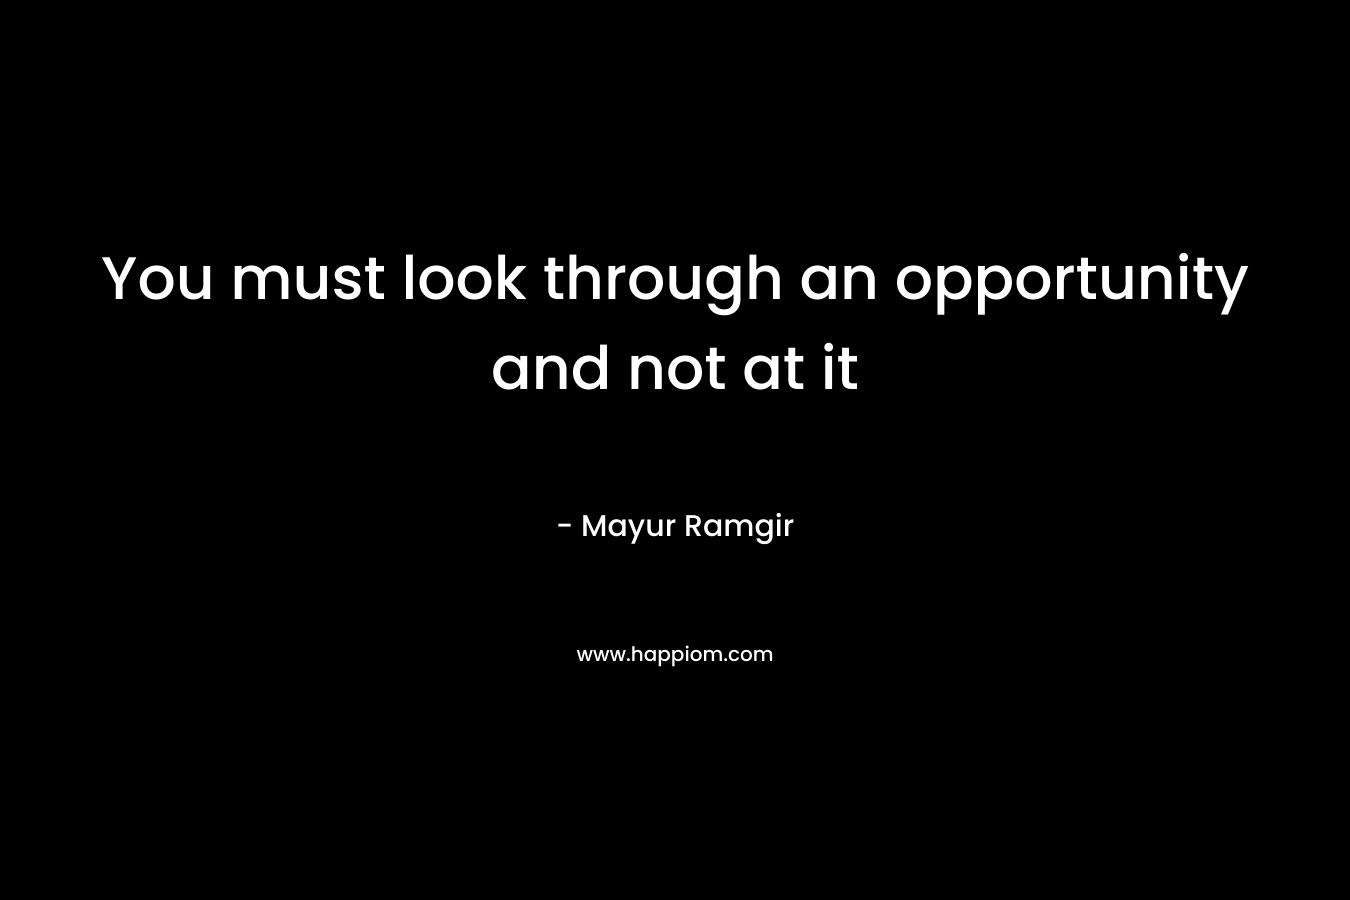 You must look through an opportunity and not at it